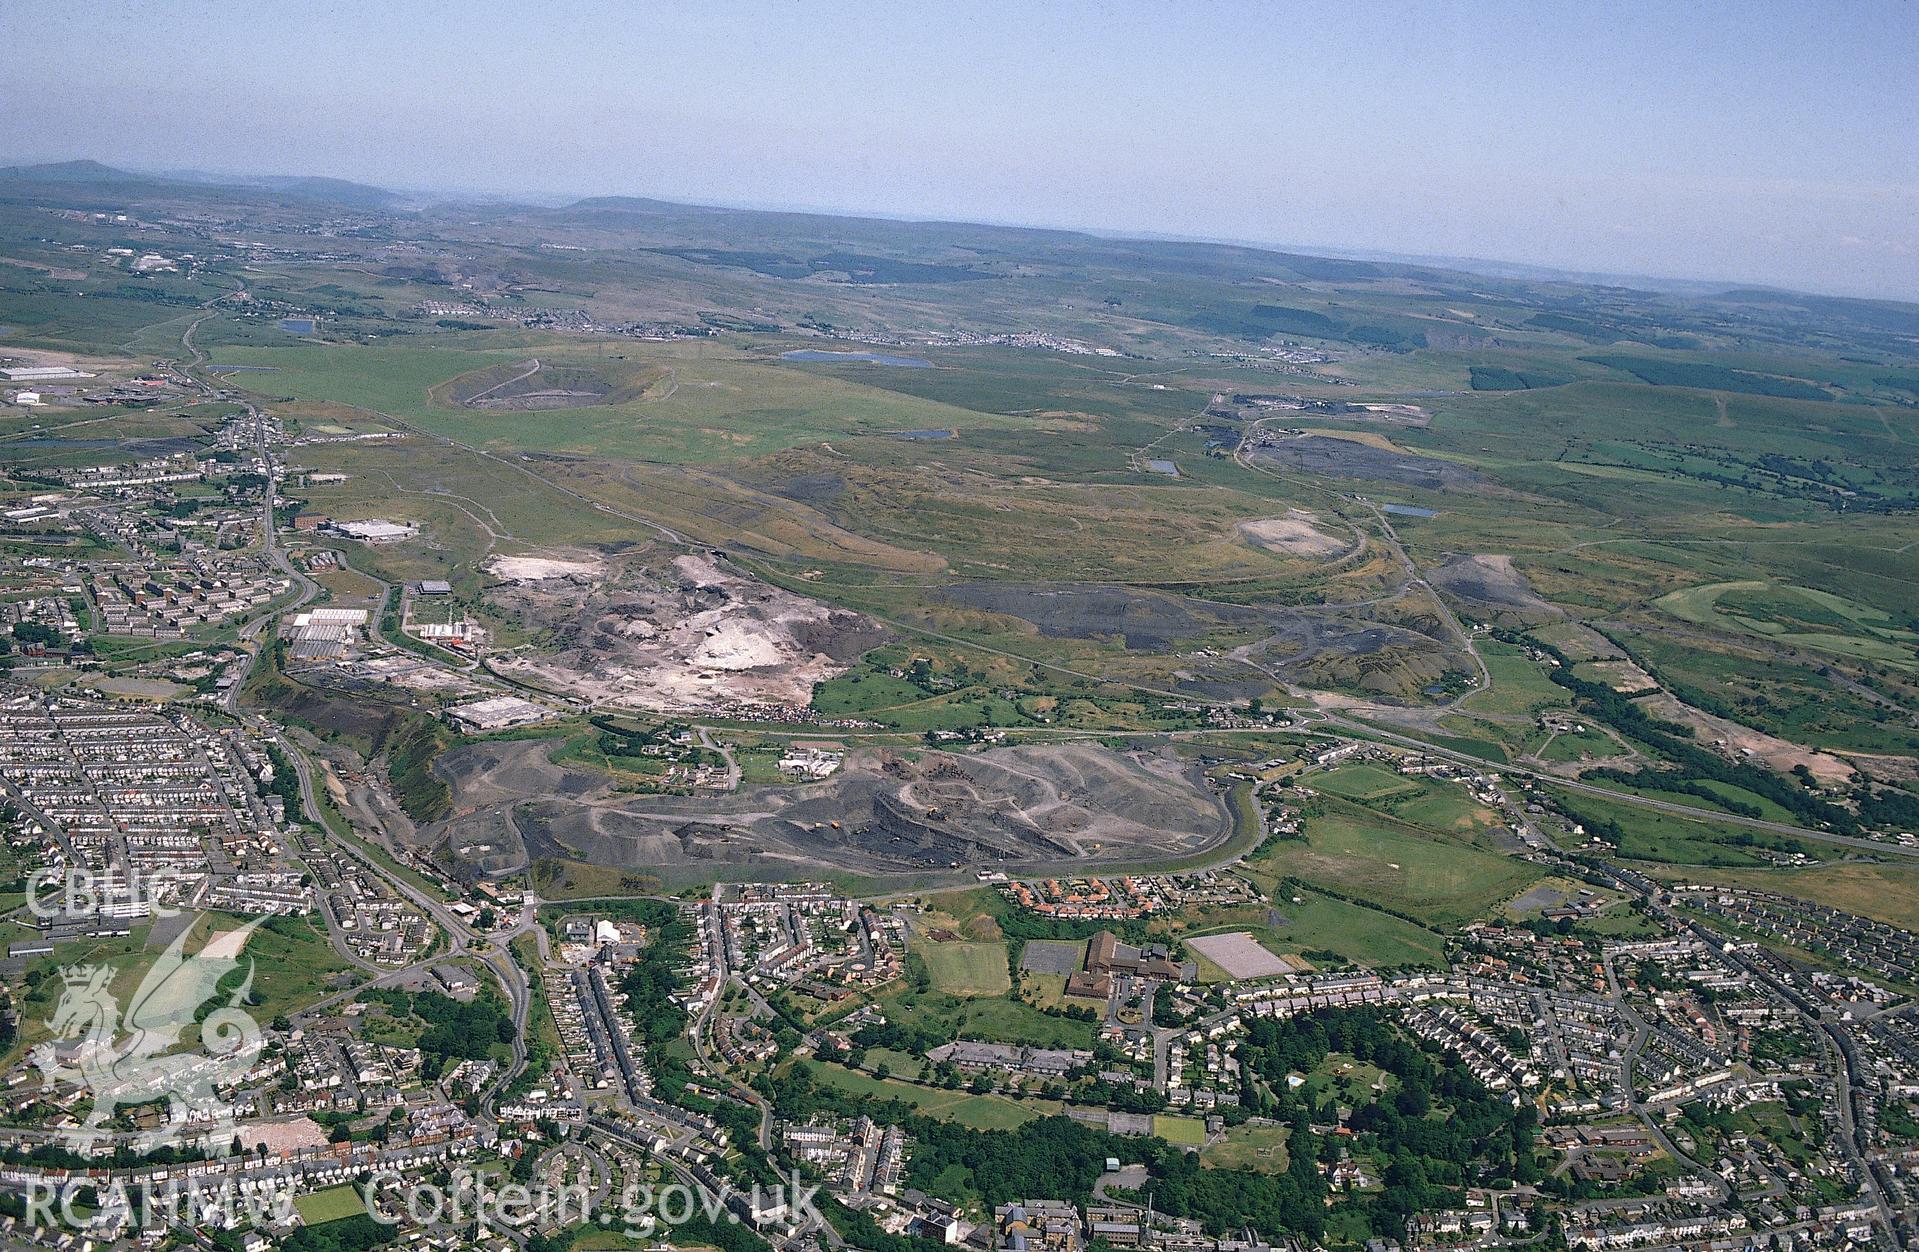 RCAHMW colour slide oblique aerial photograph of Merthyr Tydfil, taken on 06/07/1992 by CR Musson